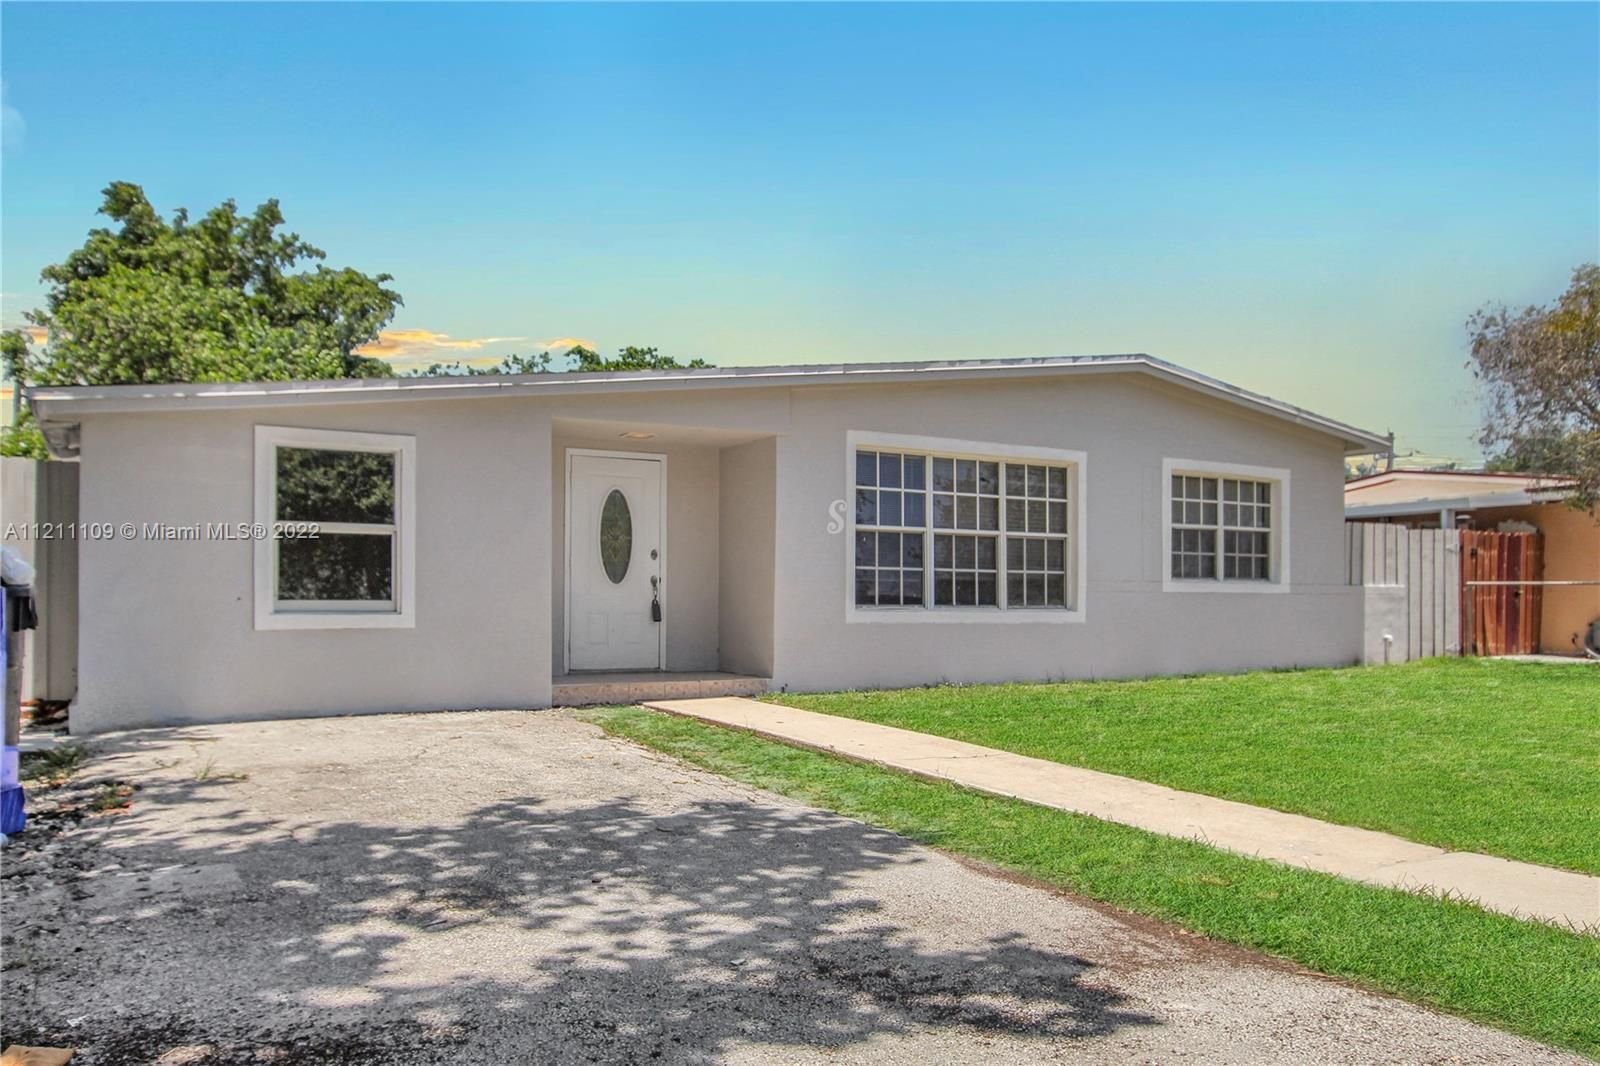 Real estate property located at 3717 41st St, Broward County, West Park, FL